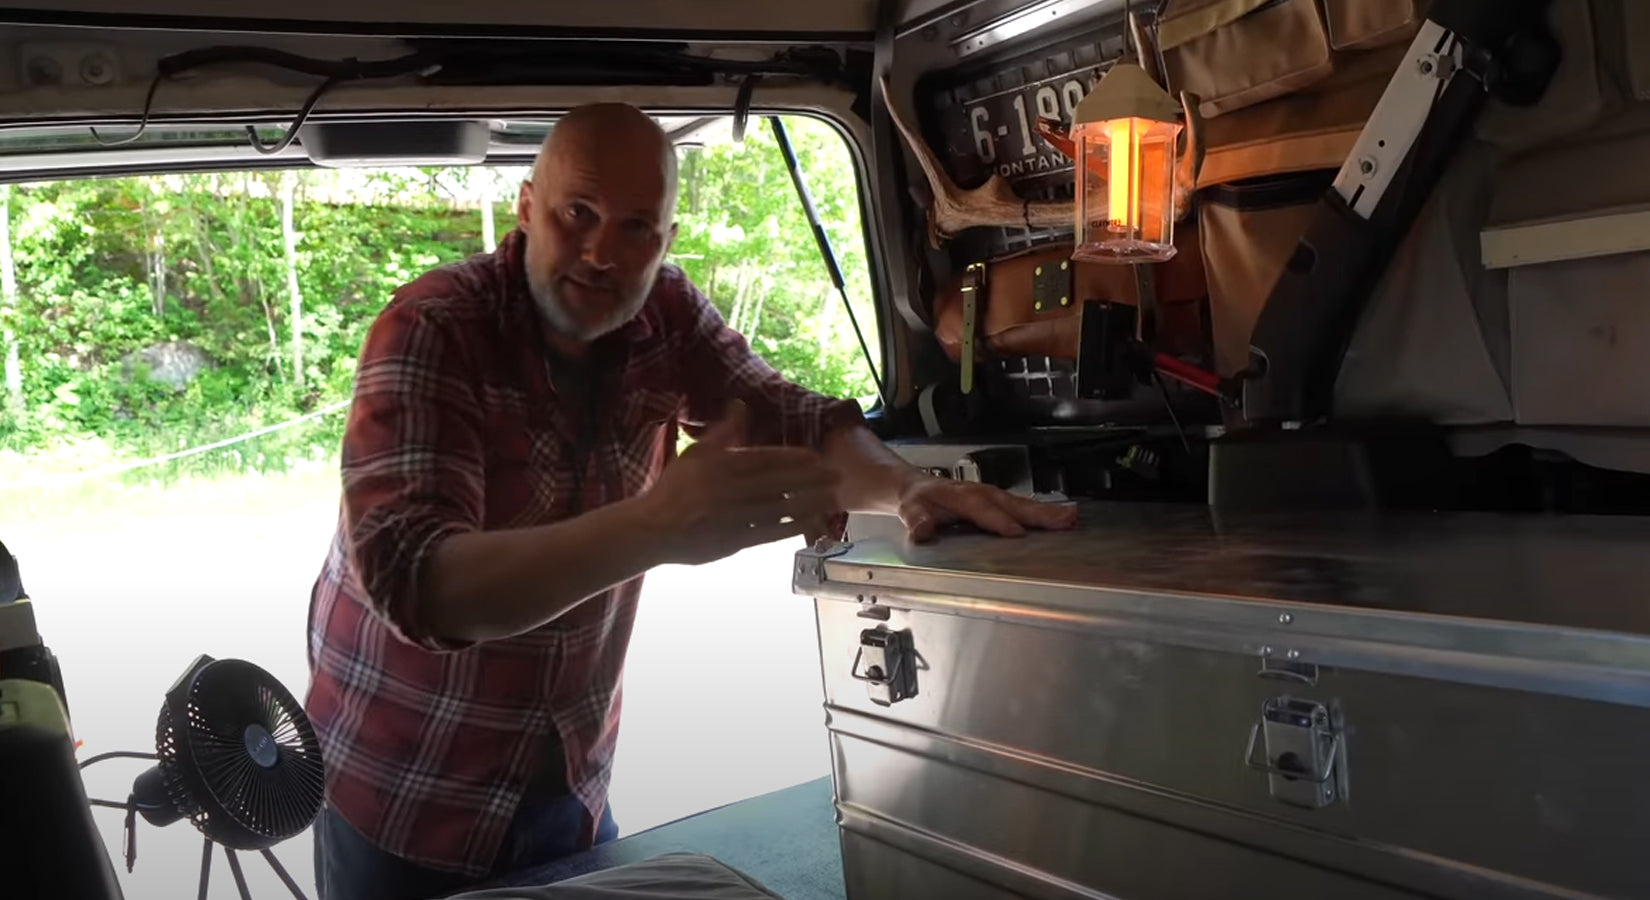 Cabin Life Installing Heaters, Lithium, and RedArc in the Jeeps - @EFRT